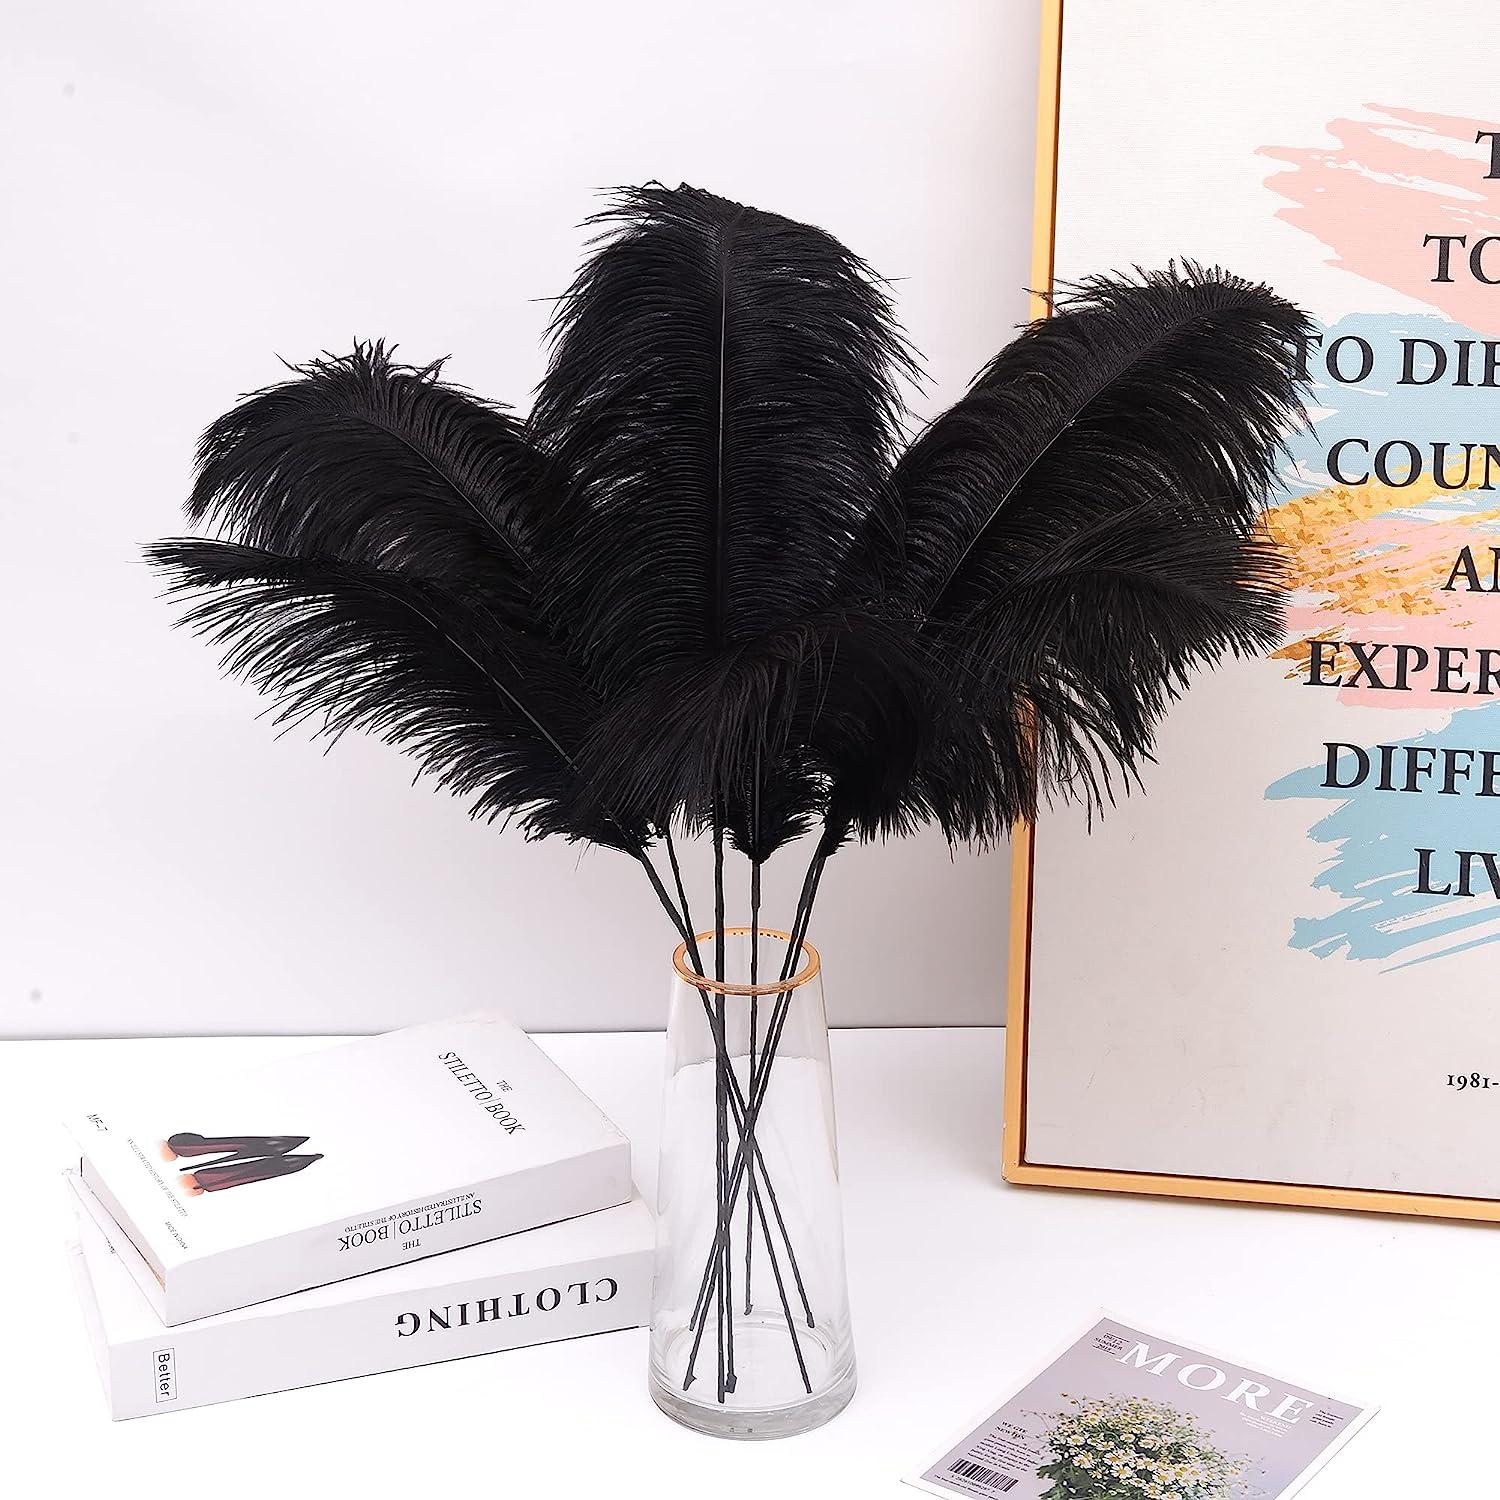  Crowye 98 Pcs Black Ostrich Feathers Bulk 6-8 Inch Black  Feathers for Centerpieces Craft Ostrich Feathers for Vase for Wedding Party  Home Costume Decorations : Arts, Crafts & Sewing